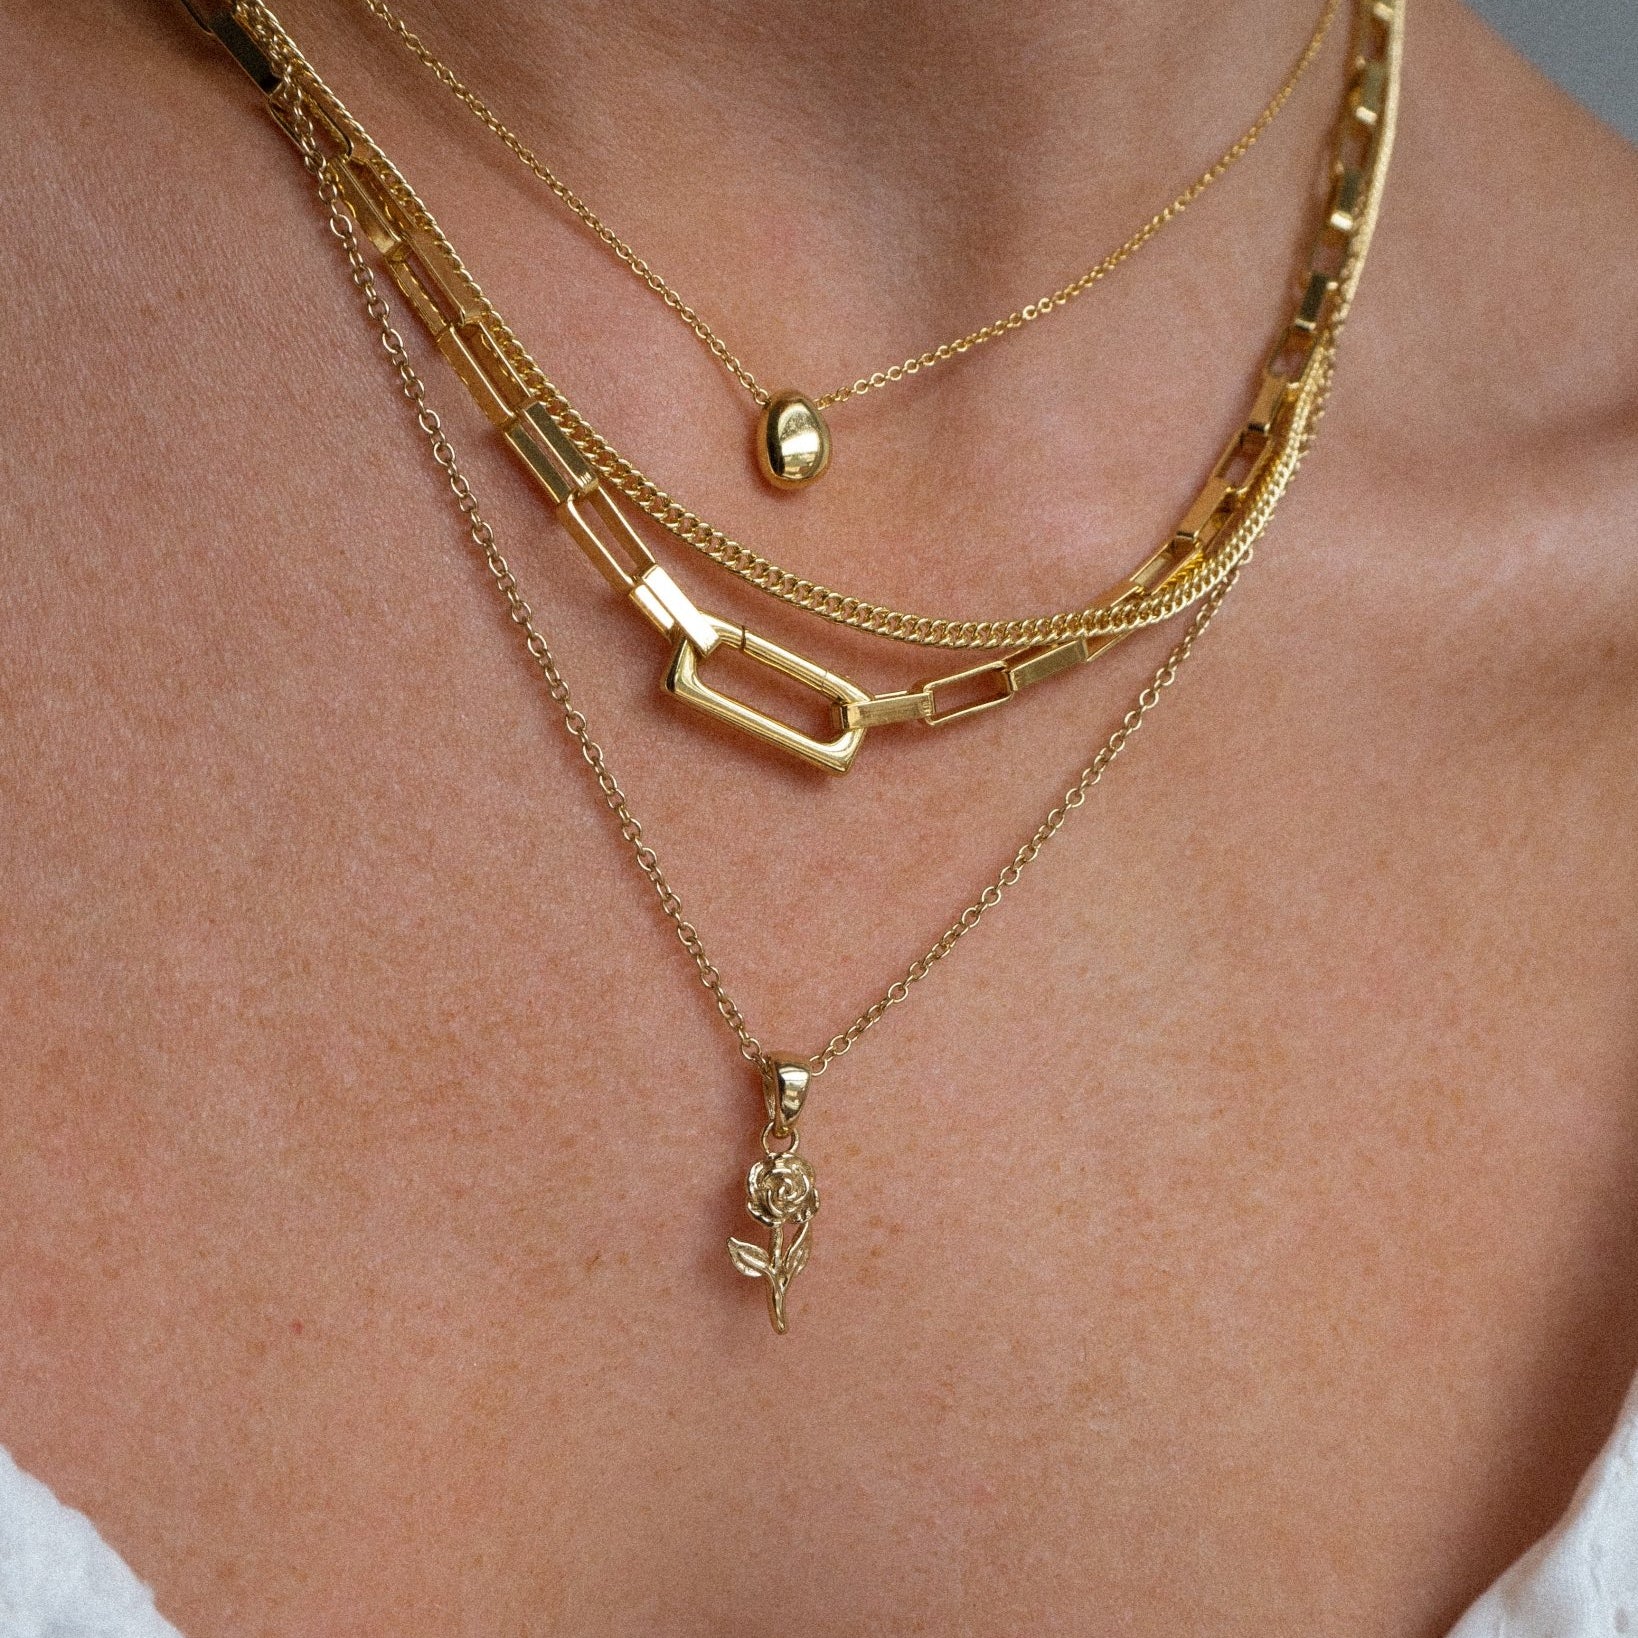 Beck necklace - five and two jewelry